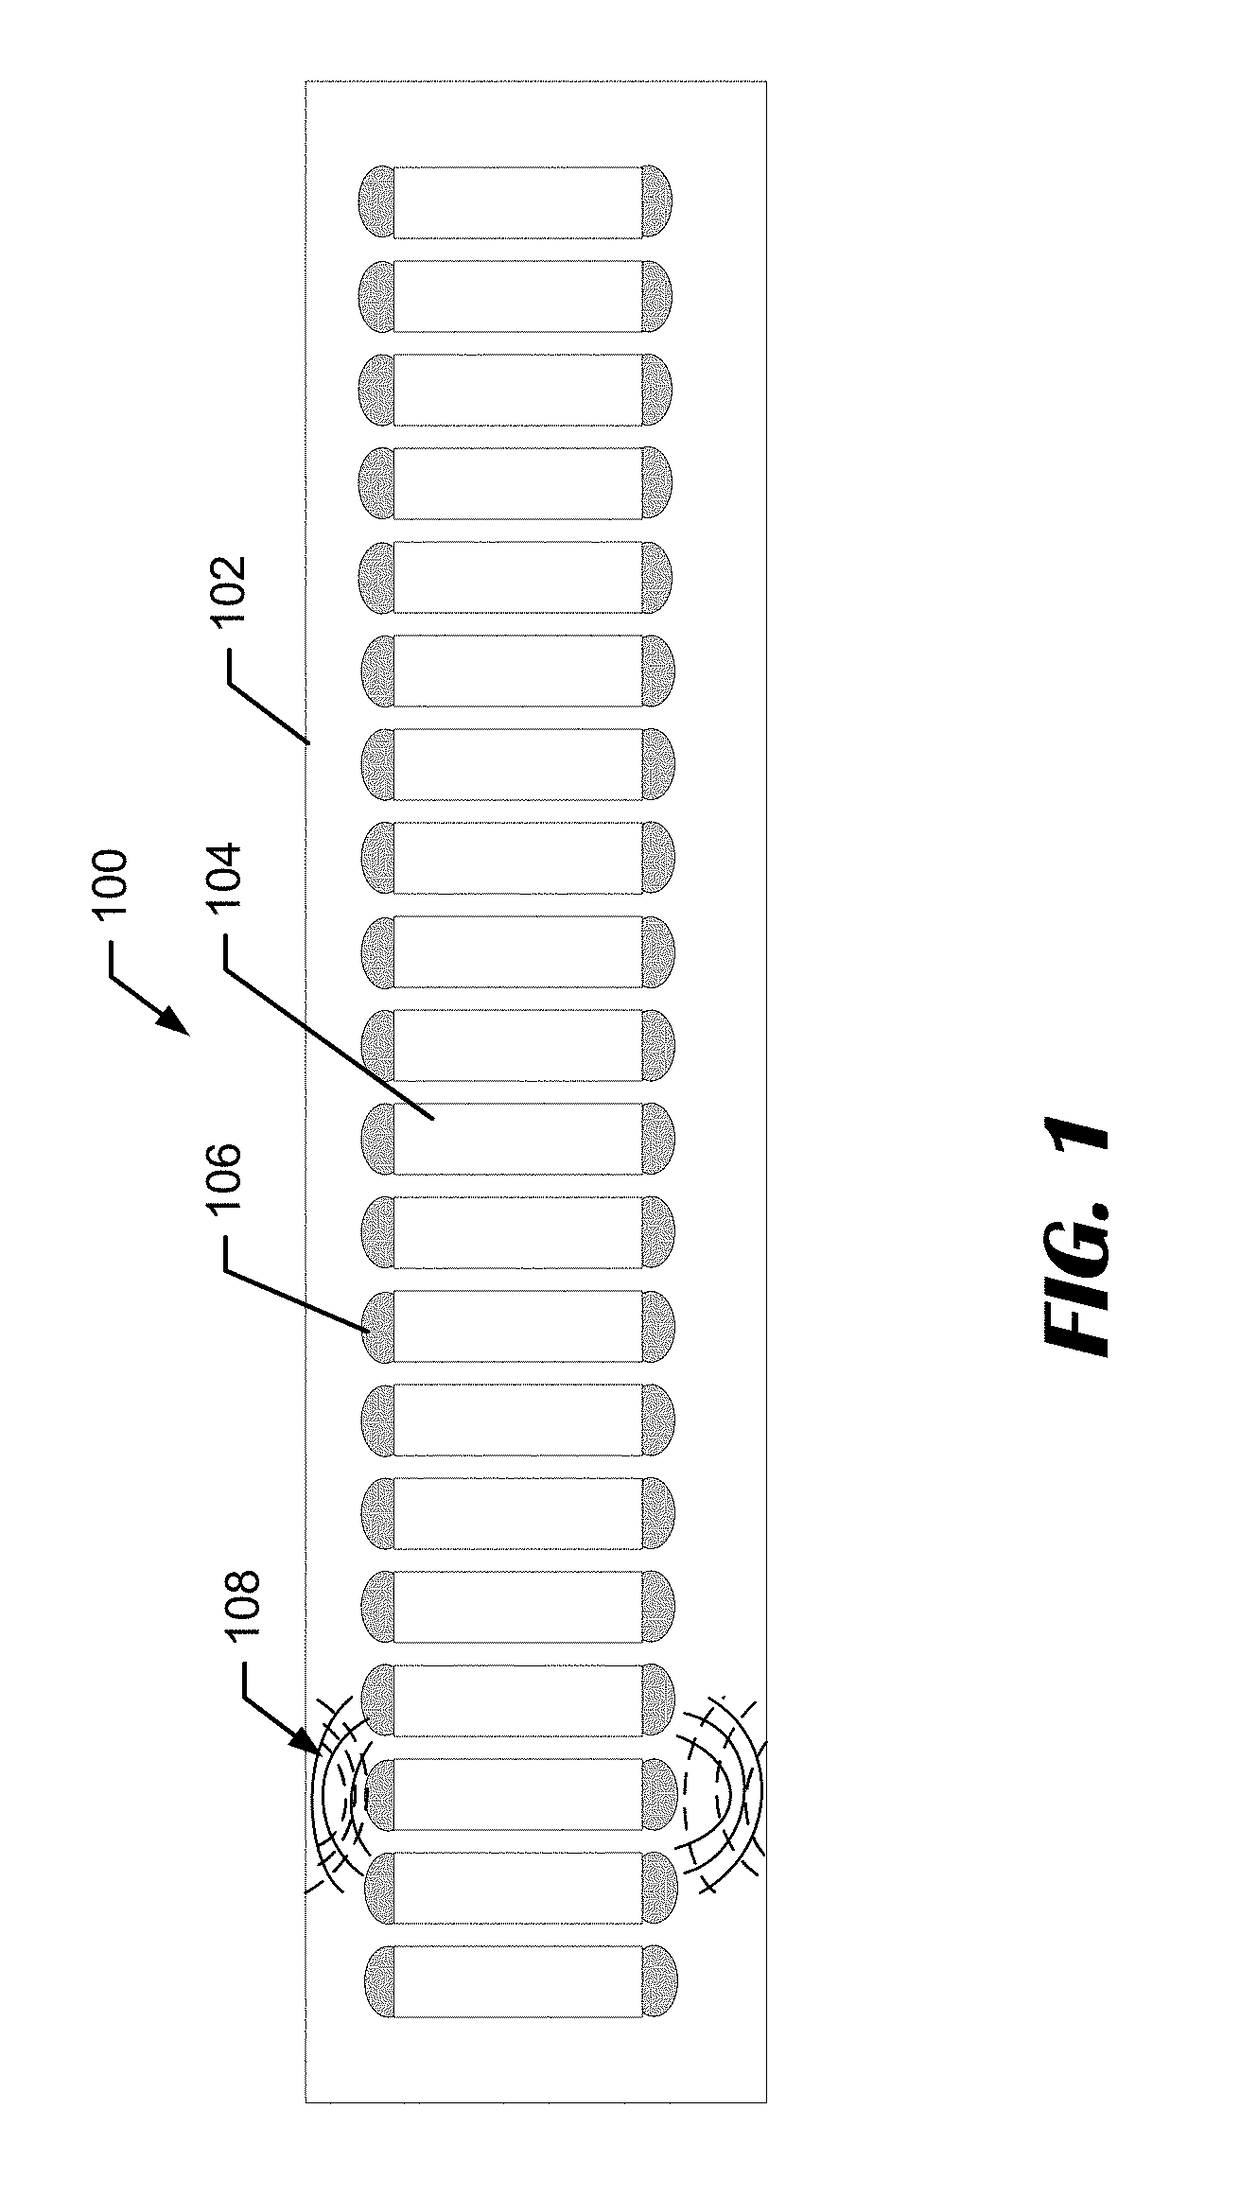 Sonar transducer assembly having a printed circuit board with flexible element tabs